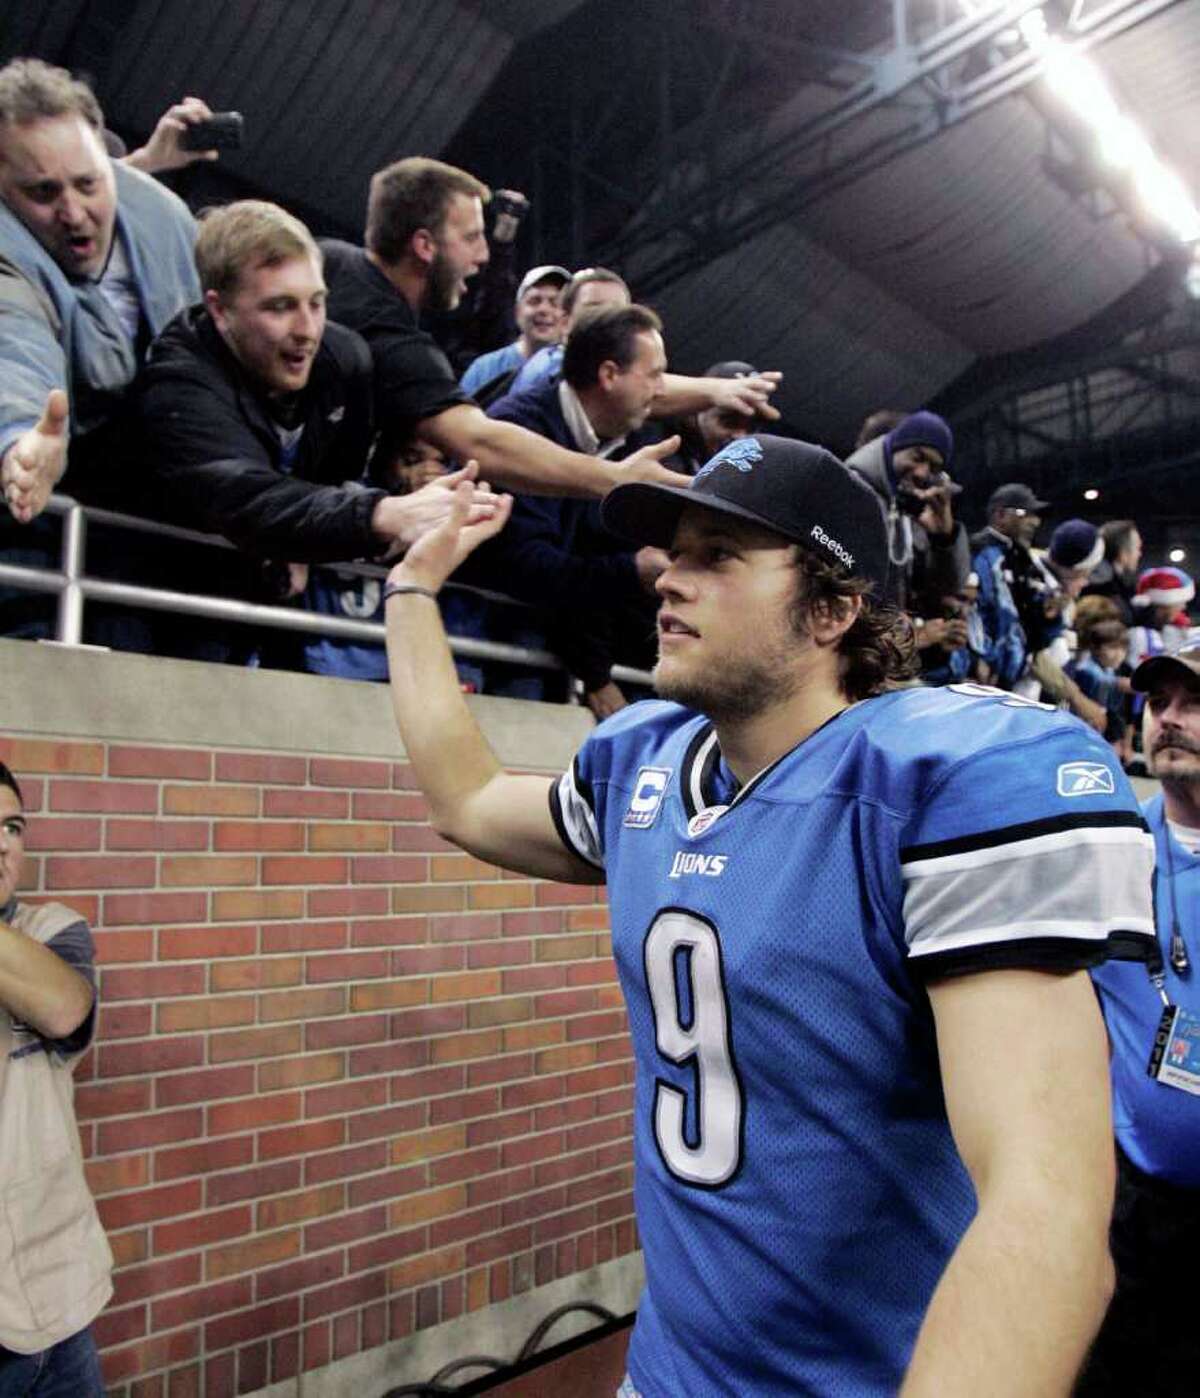 Detroit Lions quarterback Matthew Stafford (9) celebrates with fans after the Lions defeated the San Diego Chargers 38-10 in an NFL football game to clinch a playoff spot on Saturday, Dec. 24, 2011, in Detroit. (AP Photo/Duane Burleson)